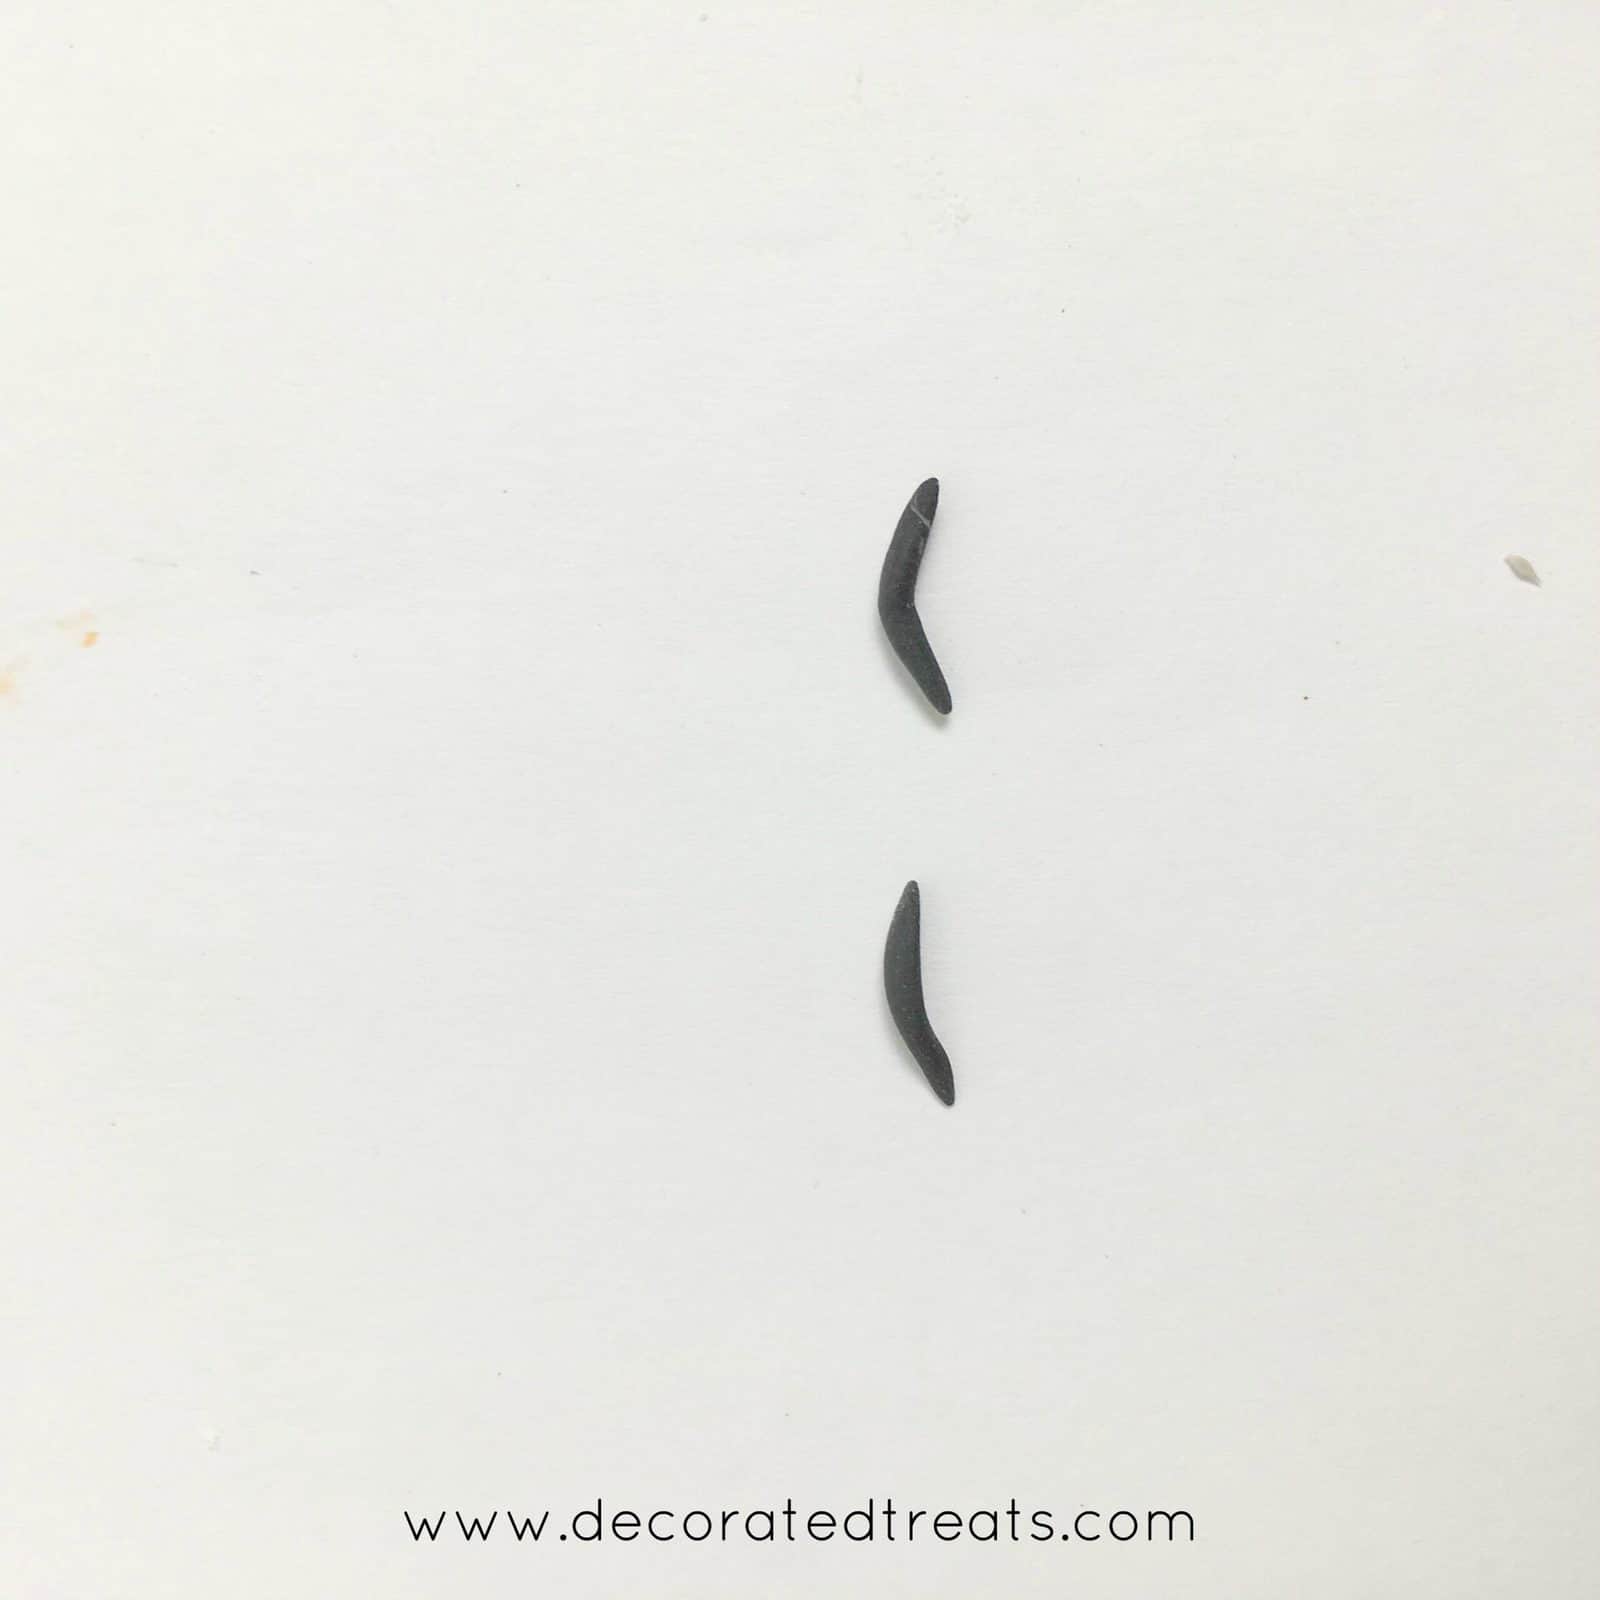 Tiny black fondant brows on a piece of white paper.